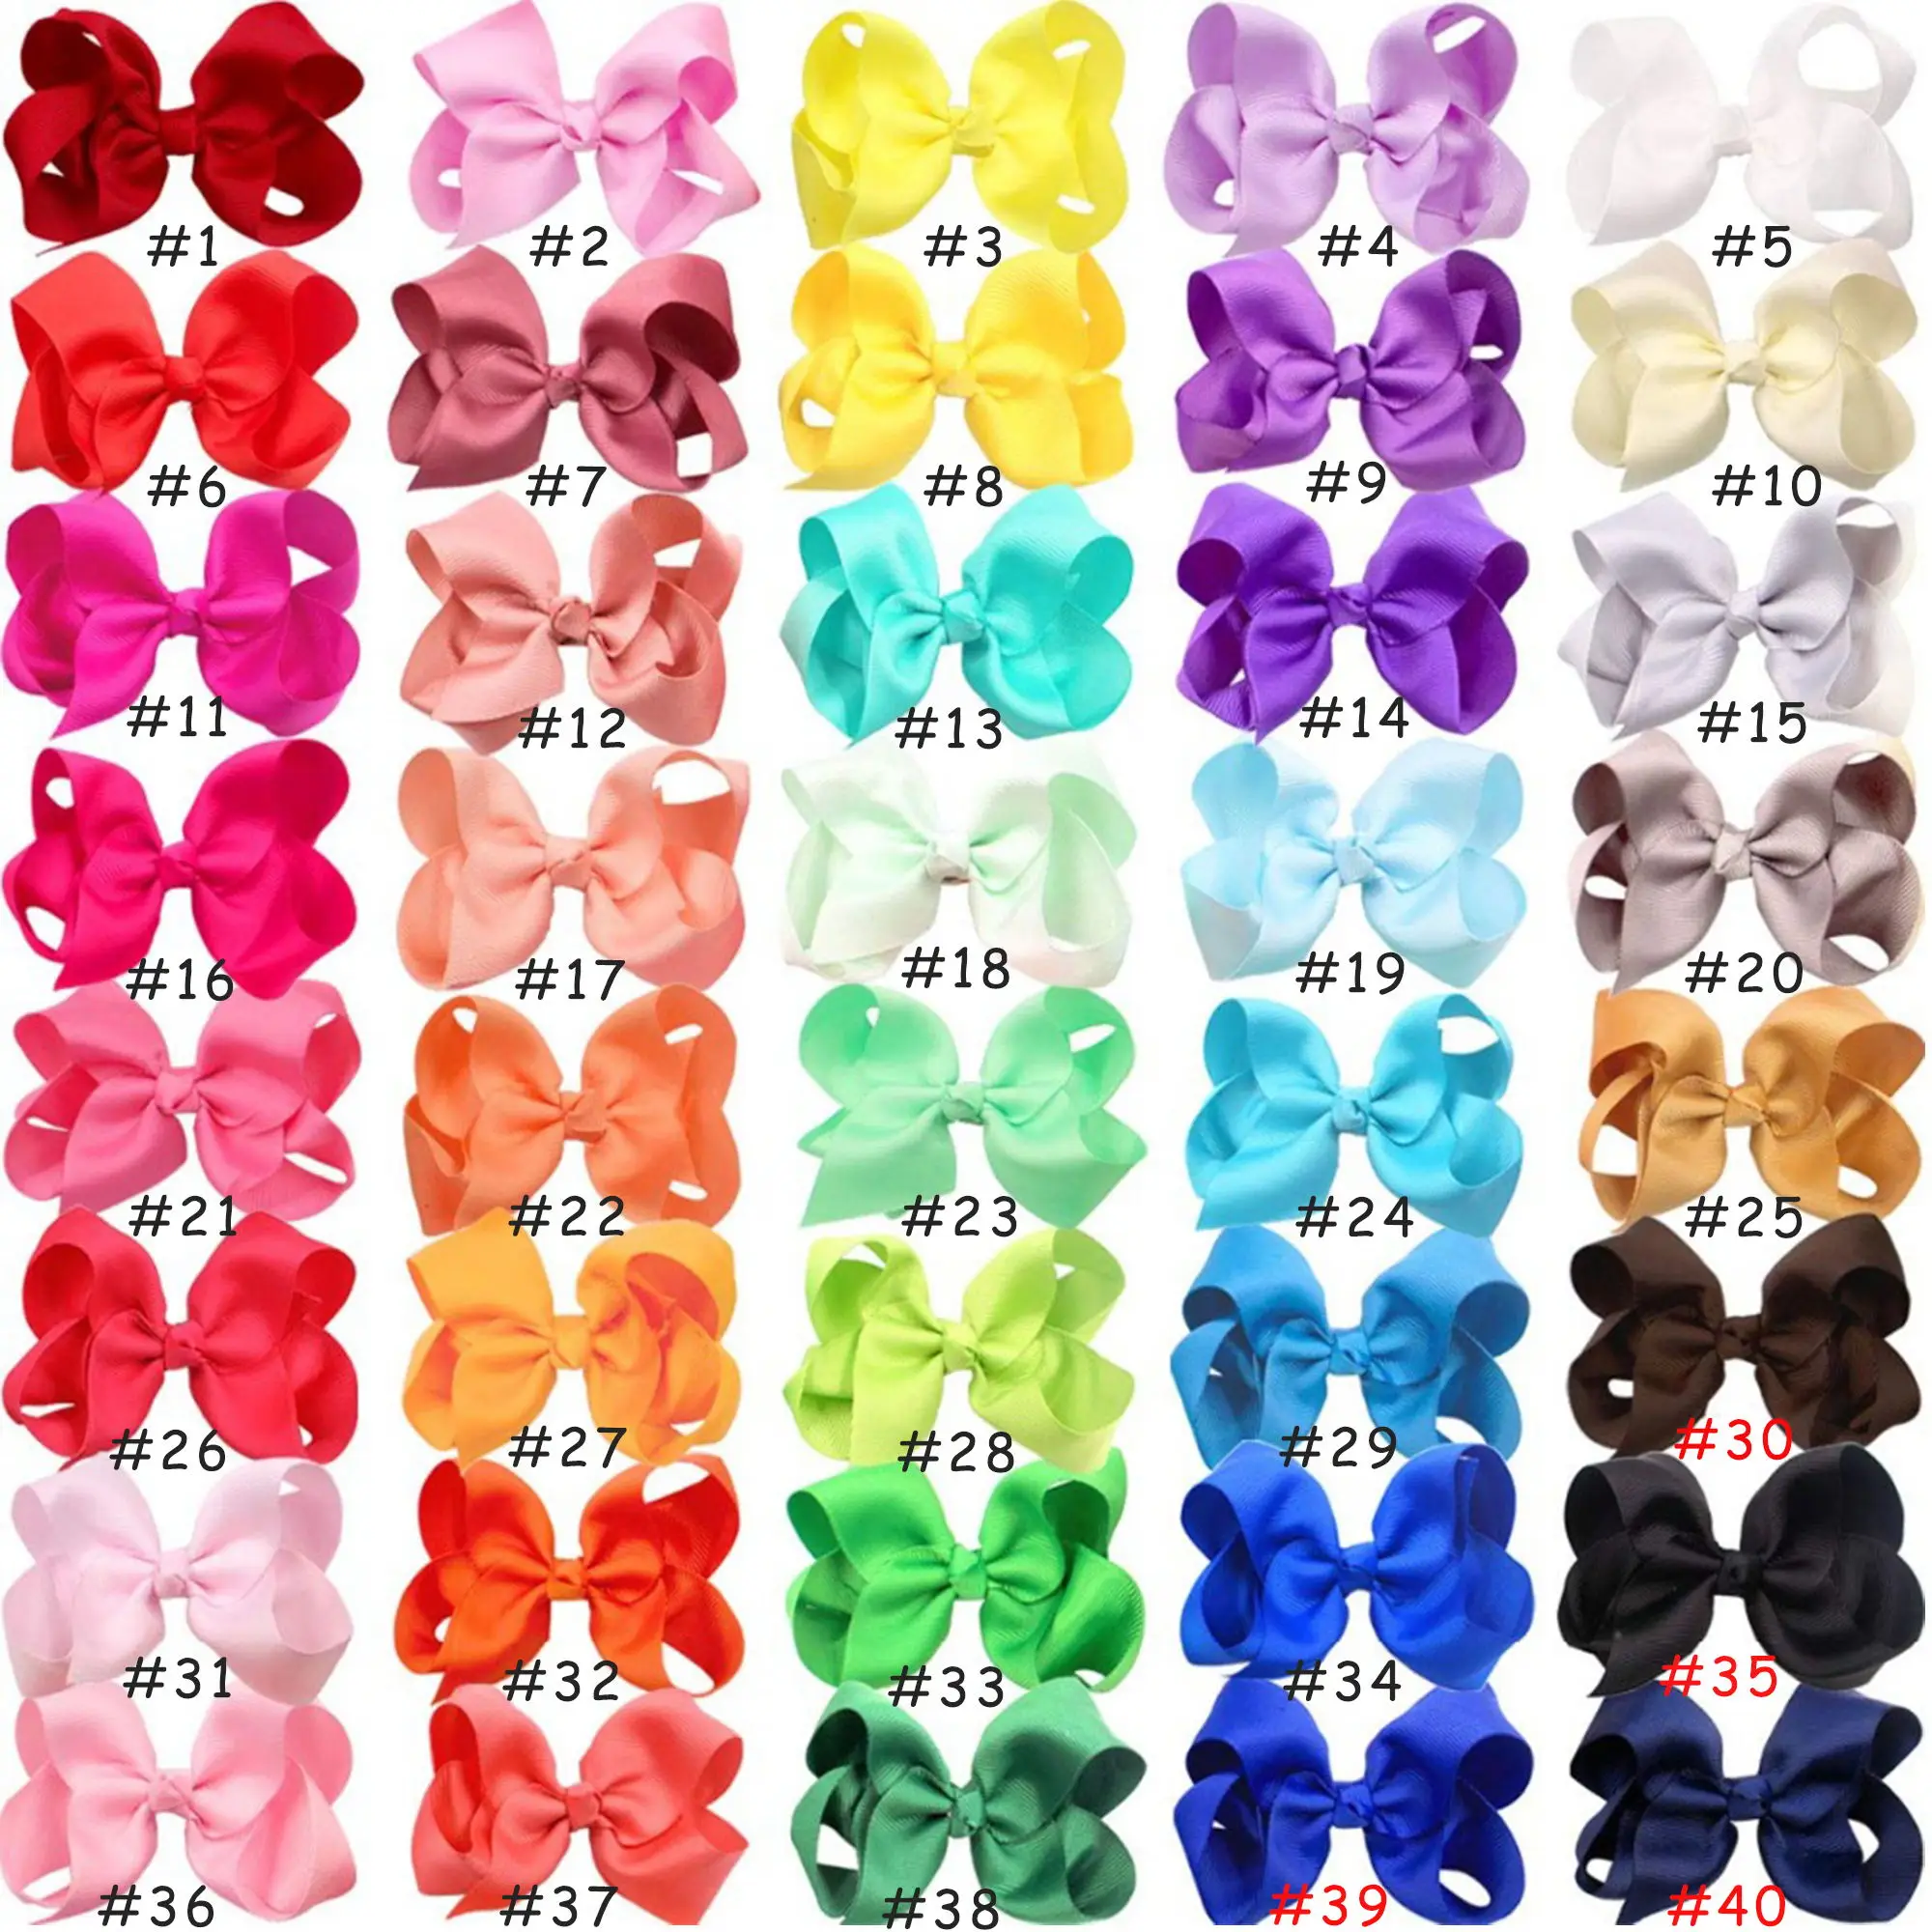 40 Colors 4.5 Inch Kid Girls Large Ribbon Hair Bows Clips Accessories for Toddlers Kids Girls hair Accessories